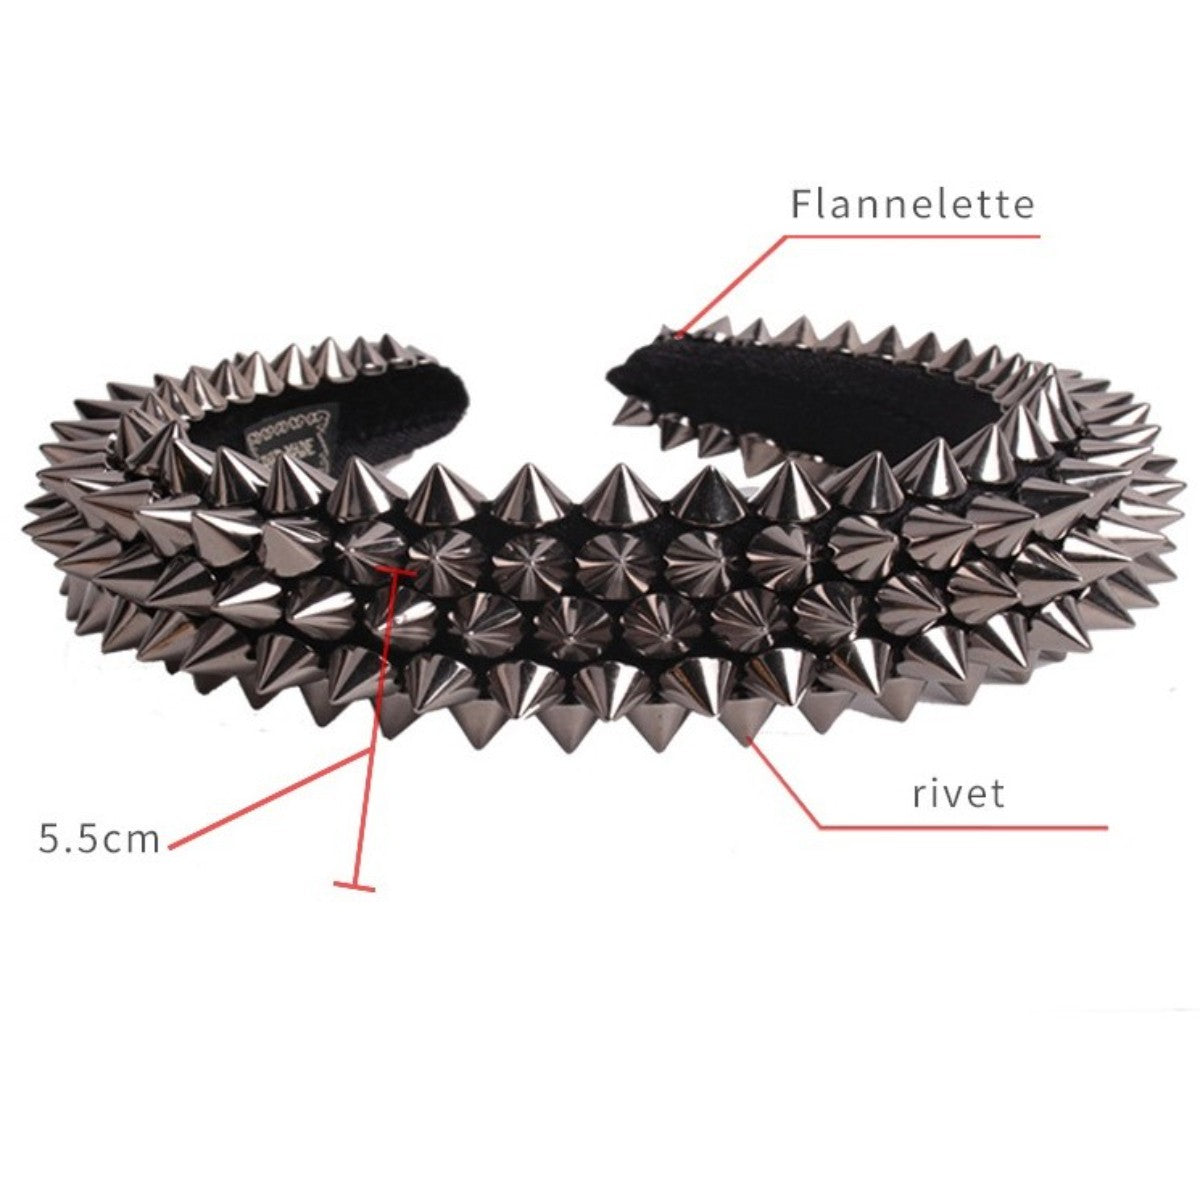 Ro Rox Punk Silver Spiked Studded Gothic Emo Headband